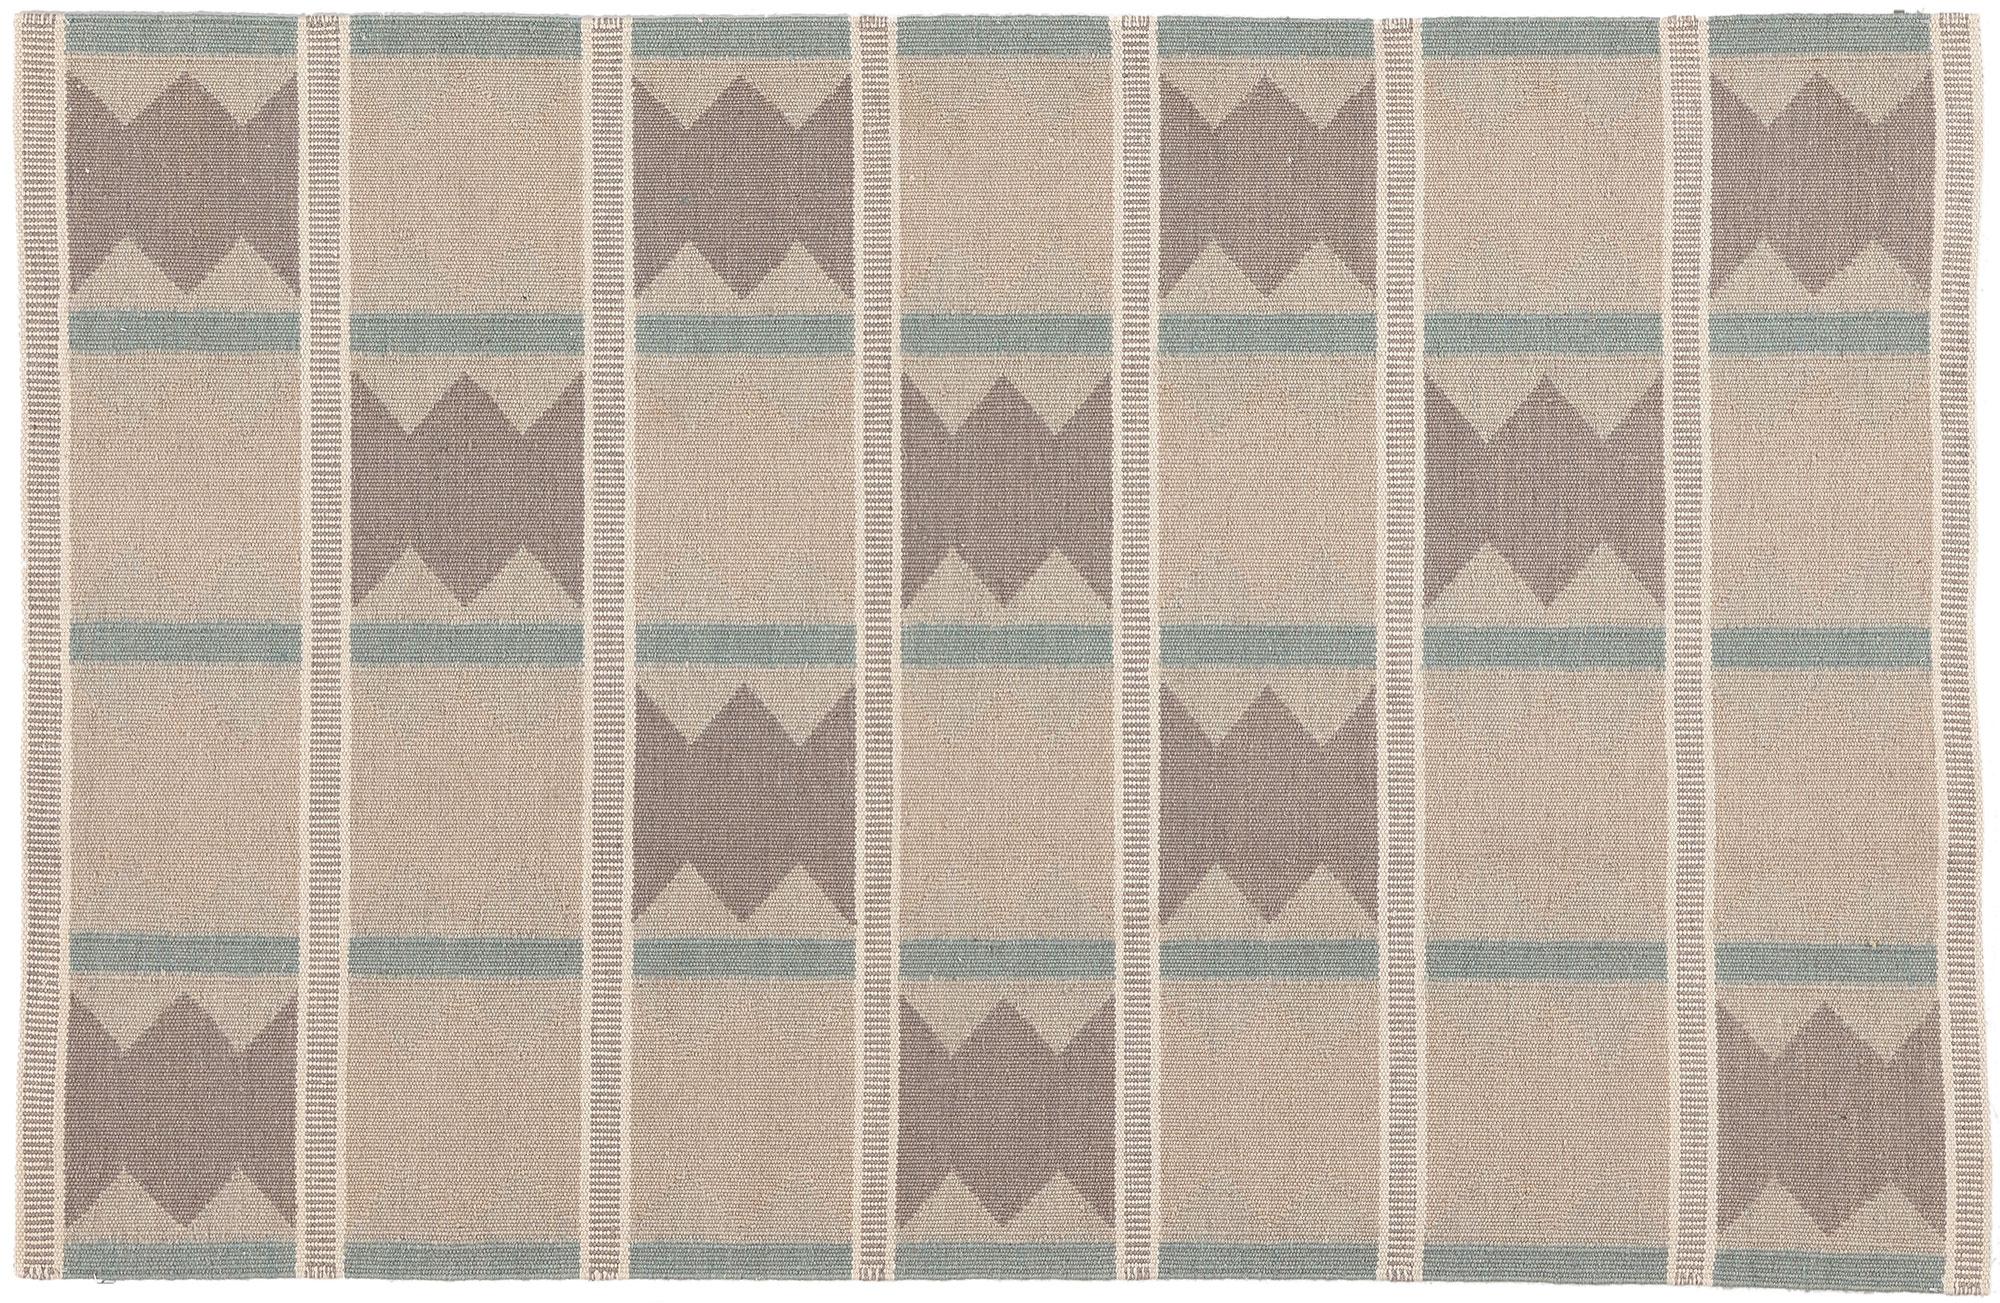 Wool Ingegerd Silow Swedish Inspired Kilim Rug, Scandi Style Meets Sublime Simplicity For Sale